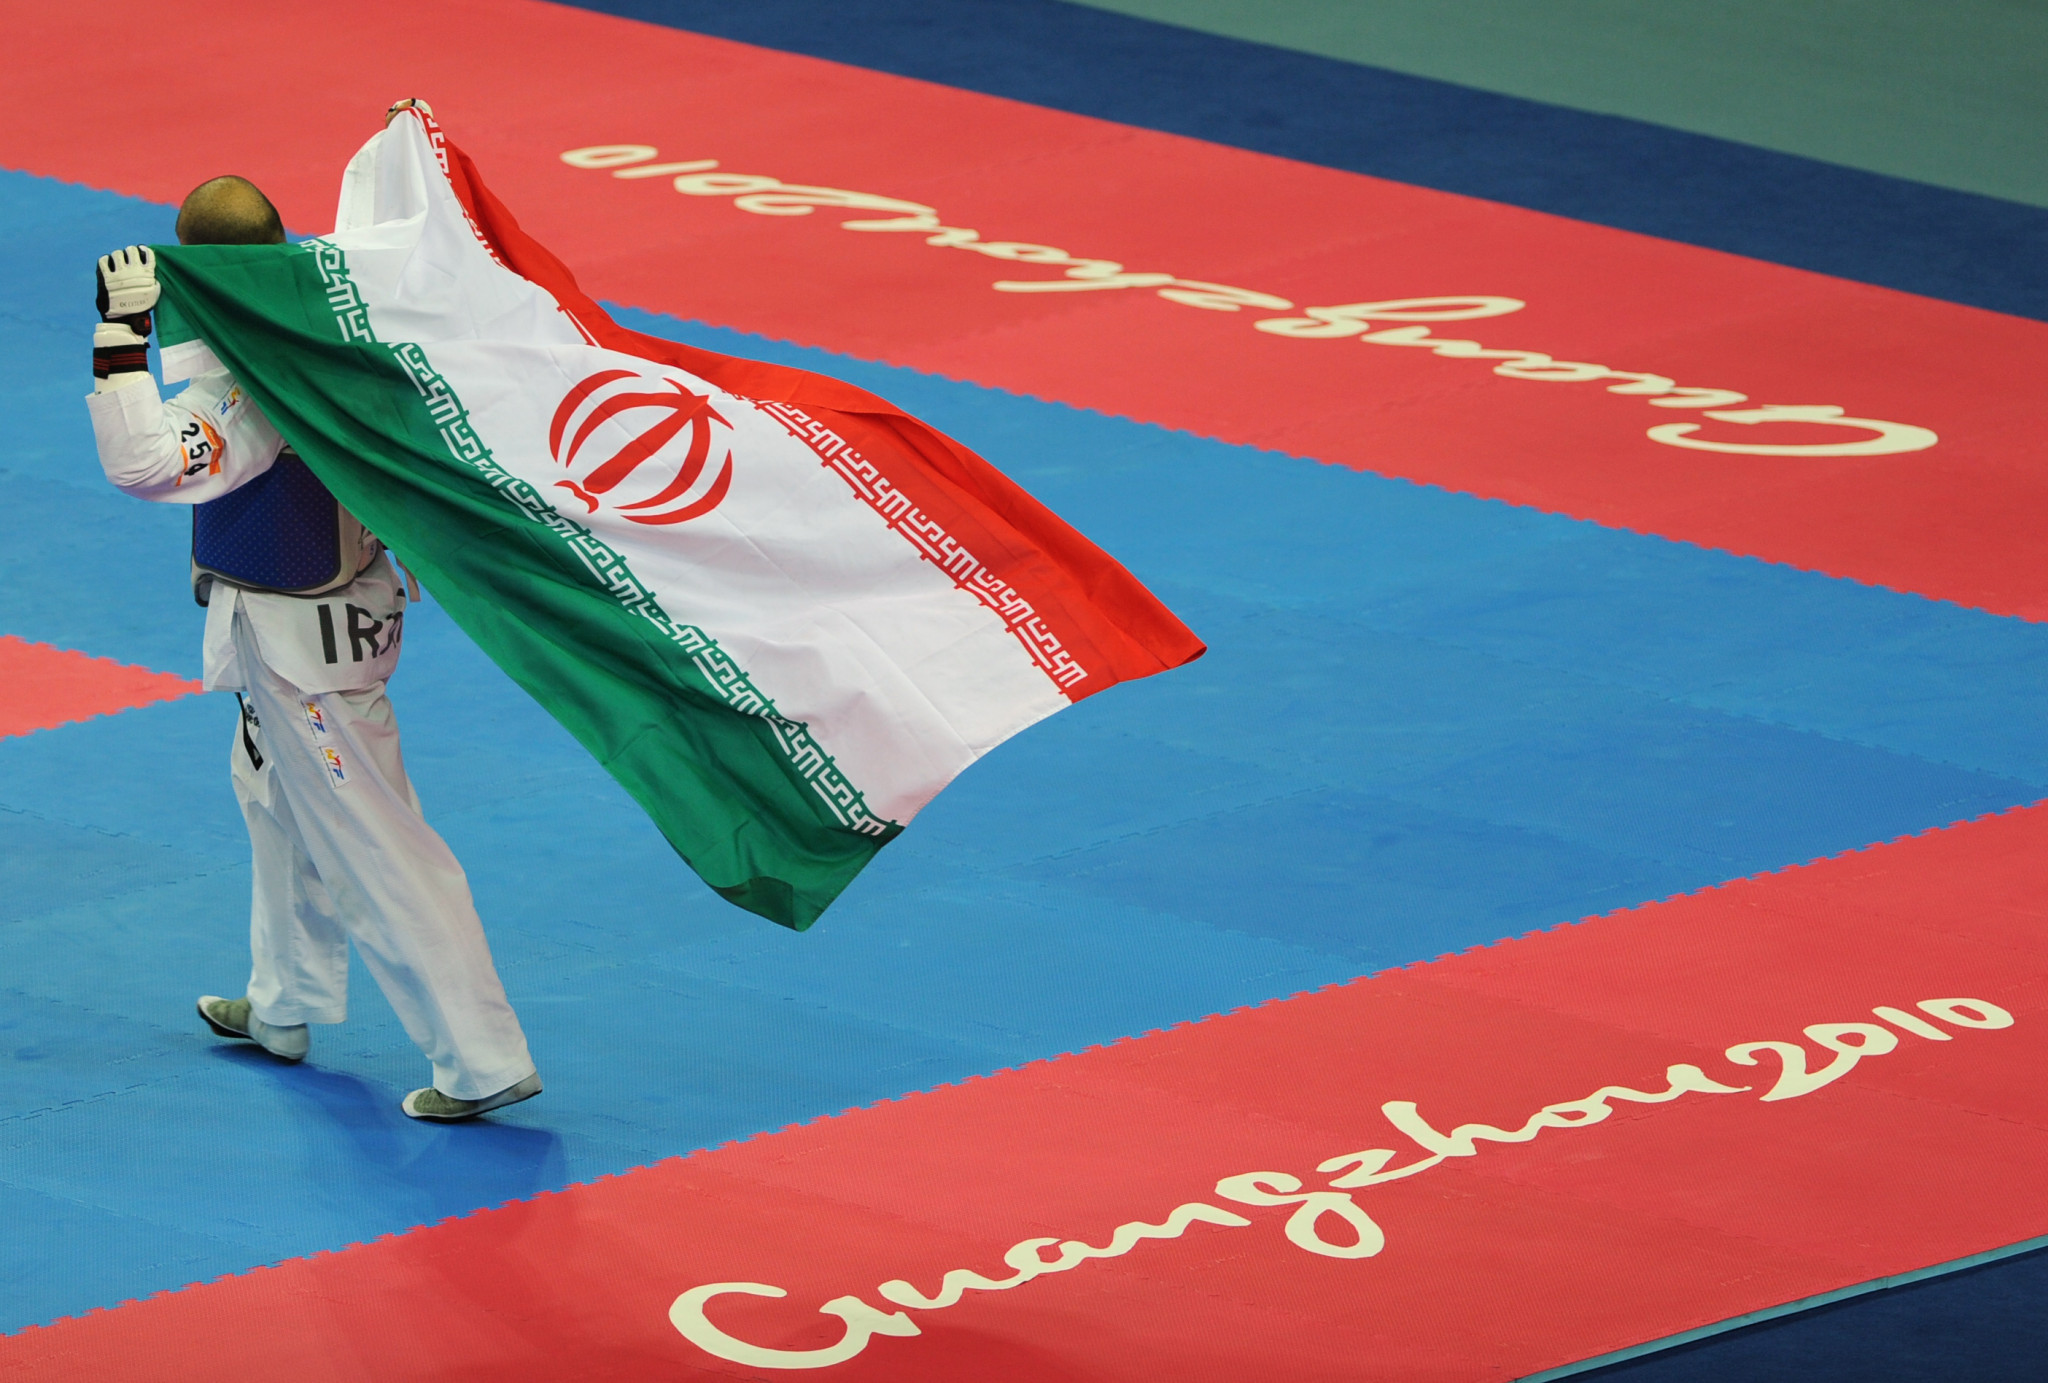 Yousef Karami won several medals during his career, including gold at the Guangzhou 2010 Asian Games ©Getty Images